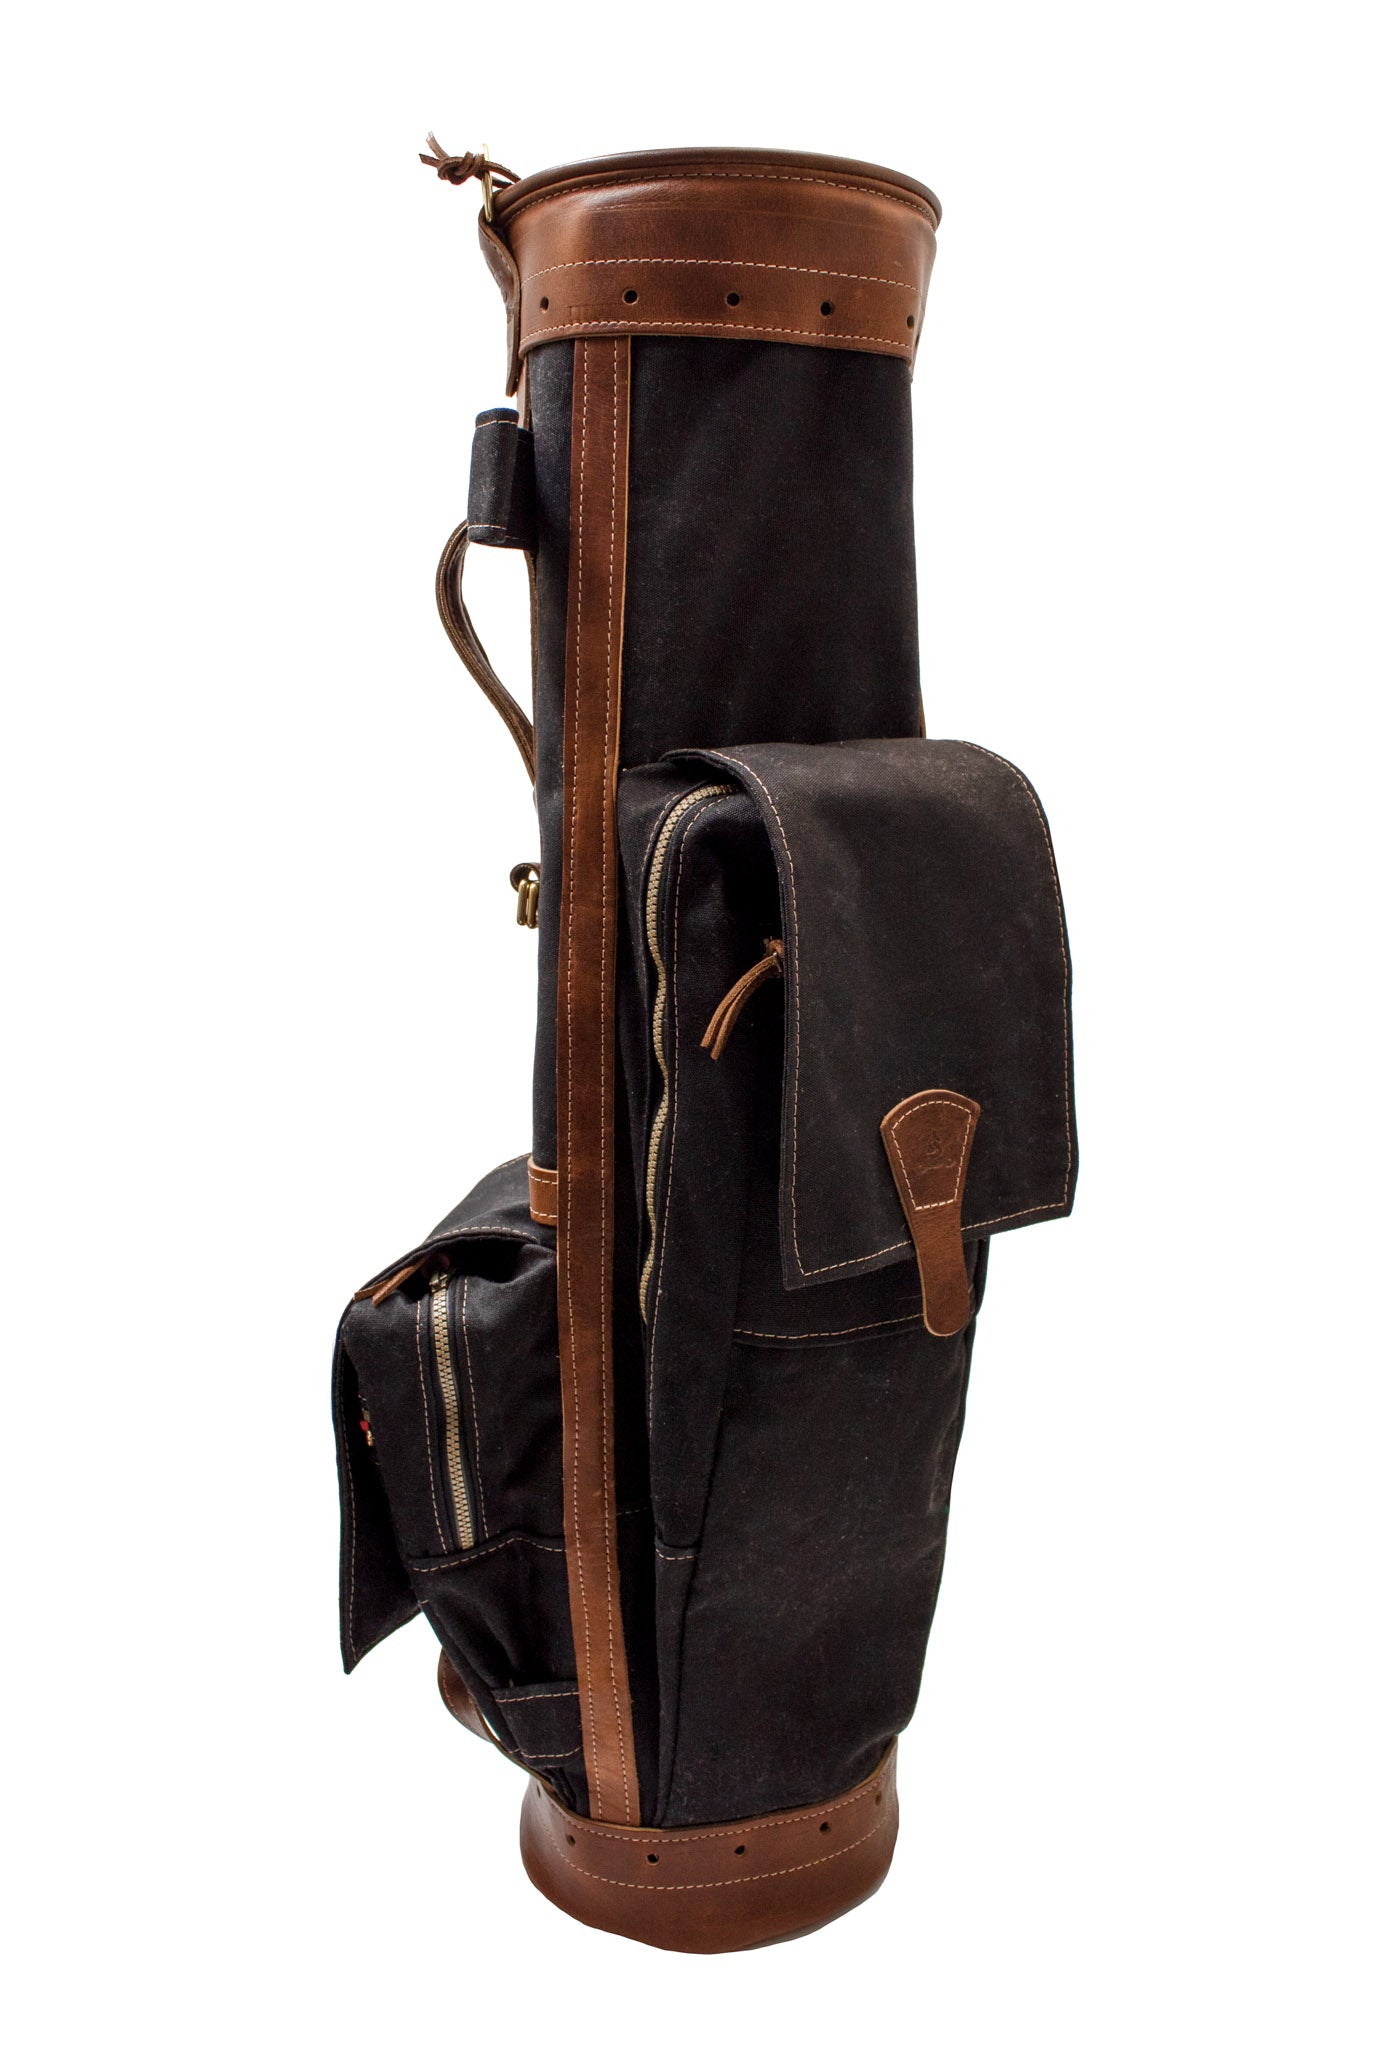 8" Black Waxed Canvas & Chestnut Leather Airliner Style Golf Bag- Steurer & Jacoby